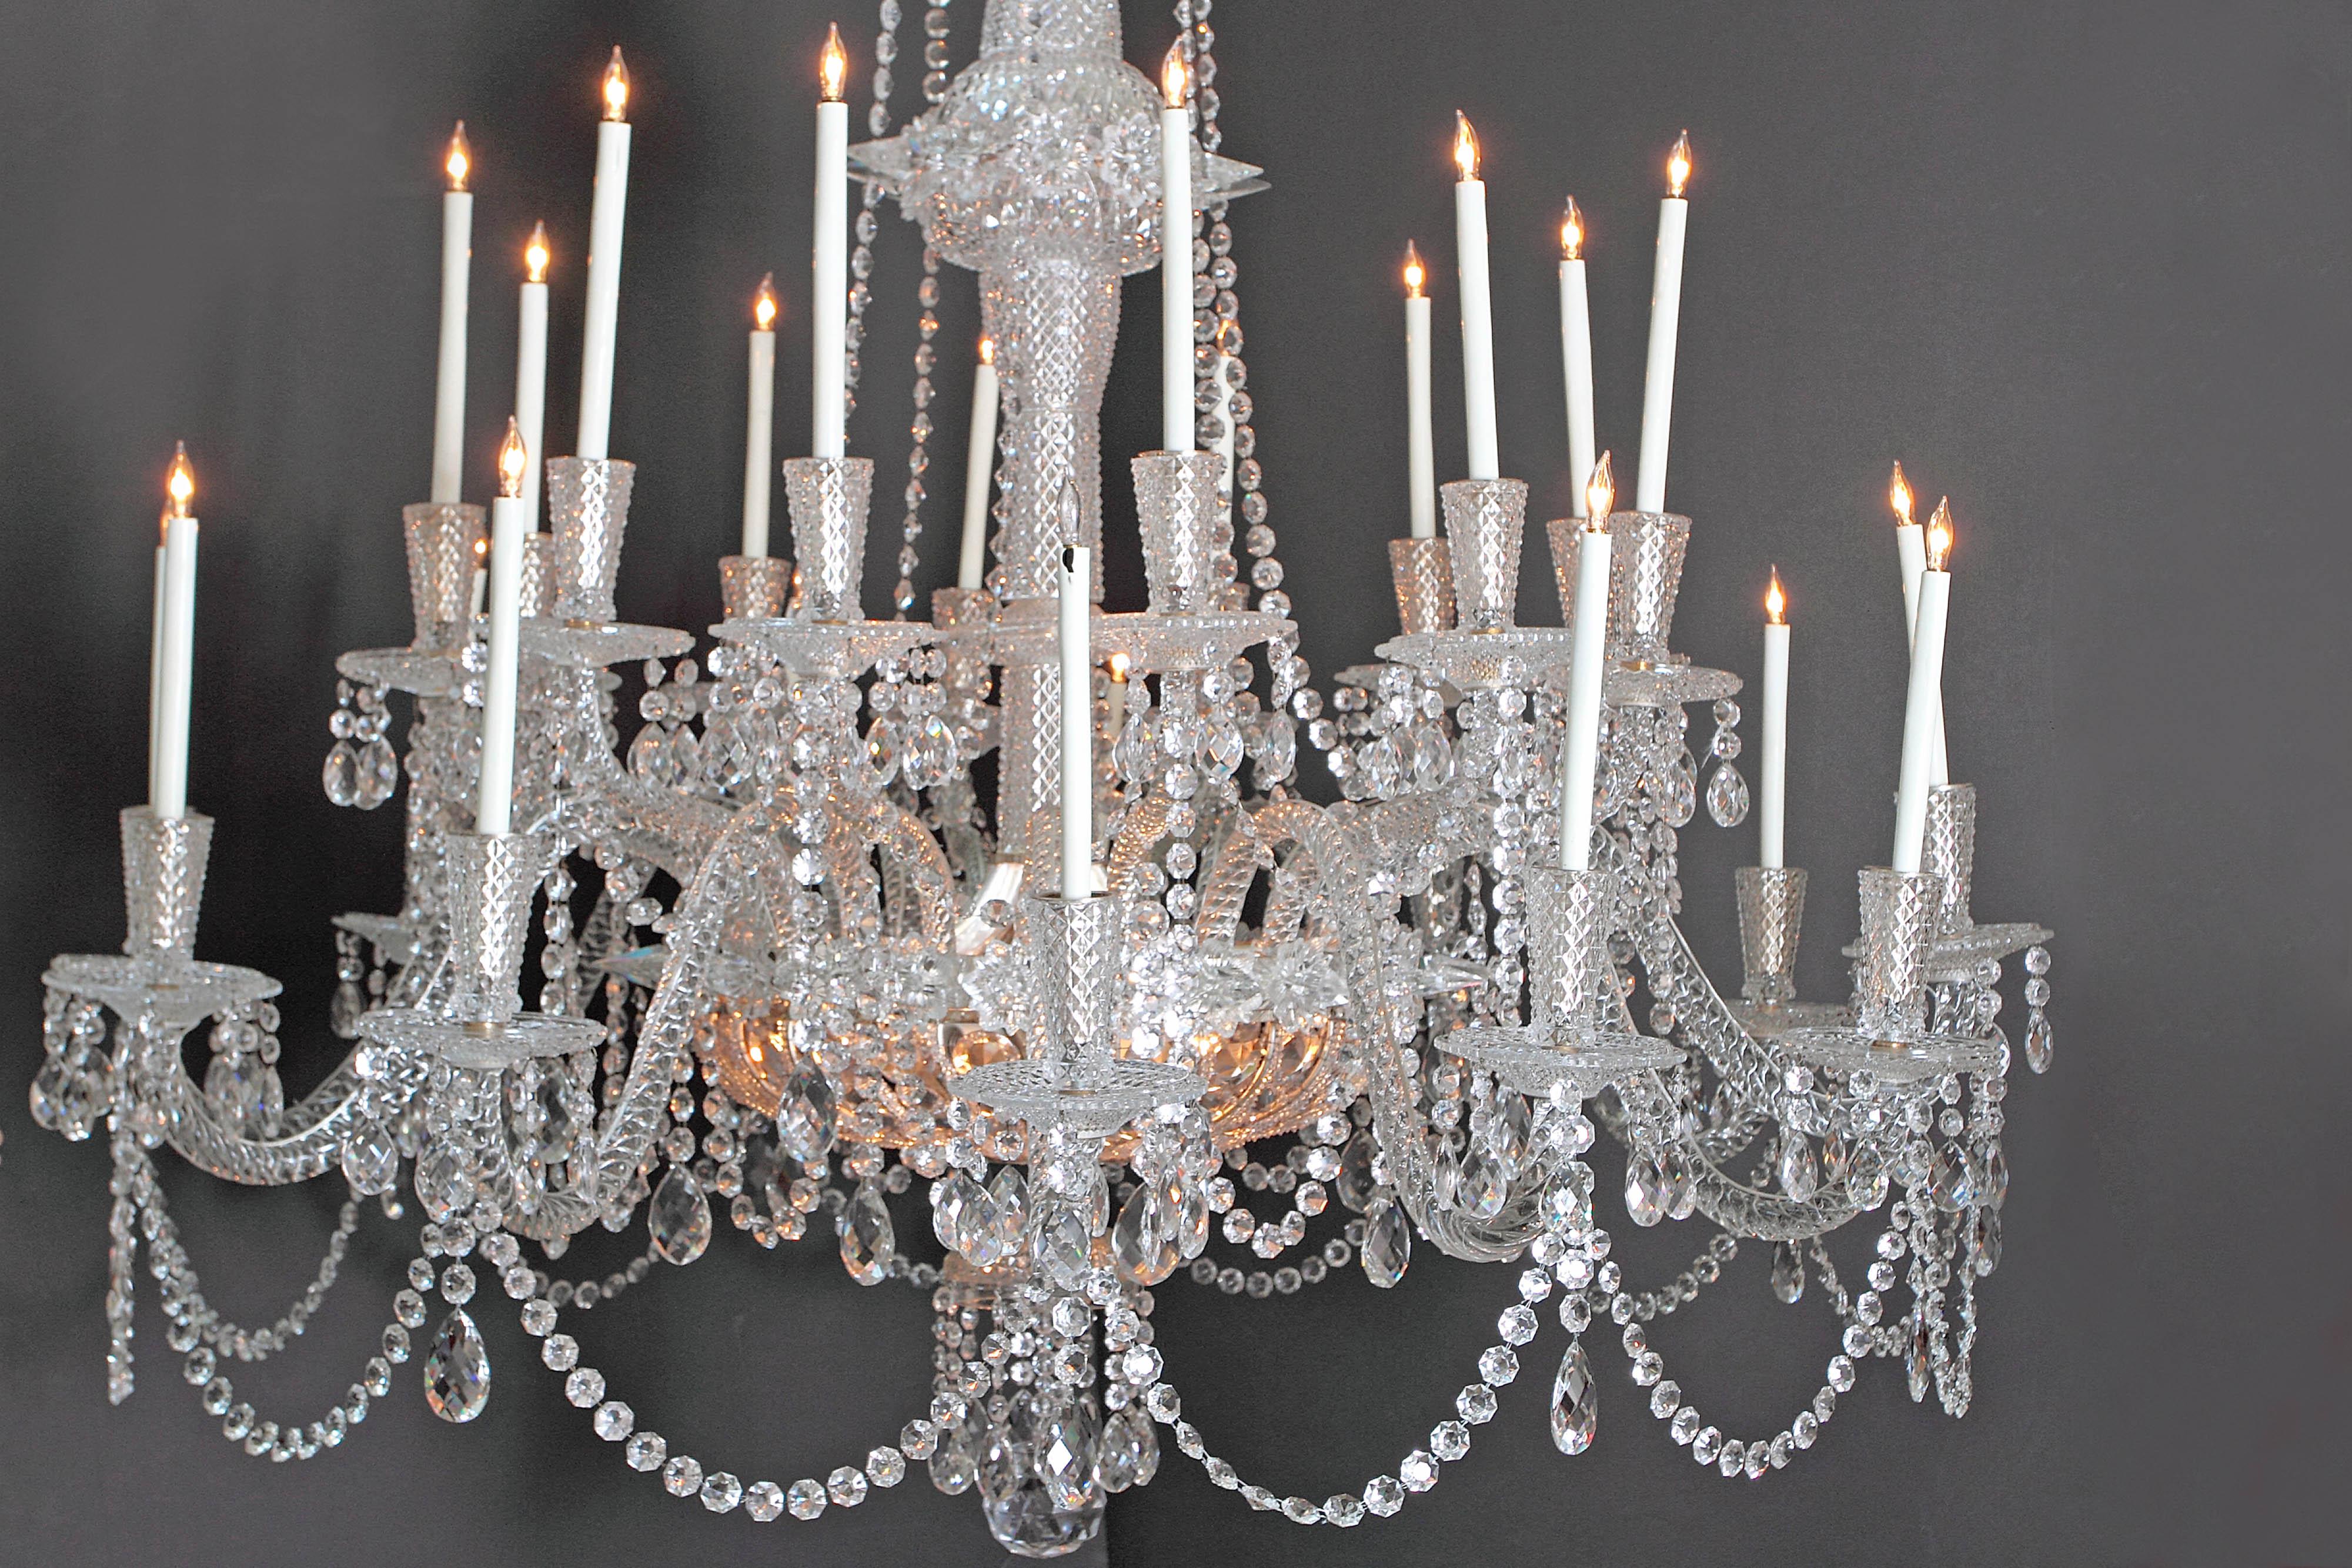 Pair of Grand Scale Mid-Victorian 24-Light Cut-Crystal Chandeliers For Sale 1